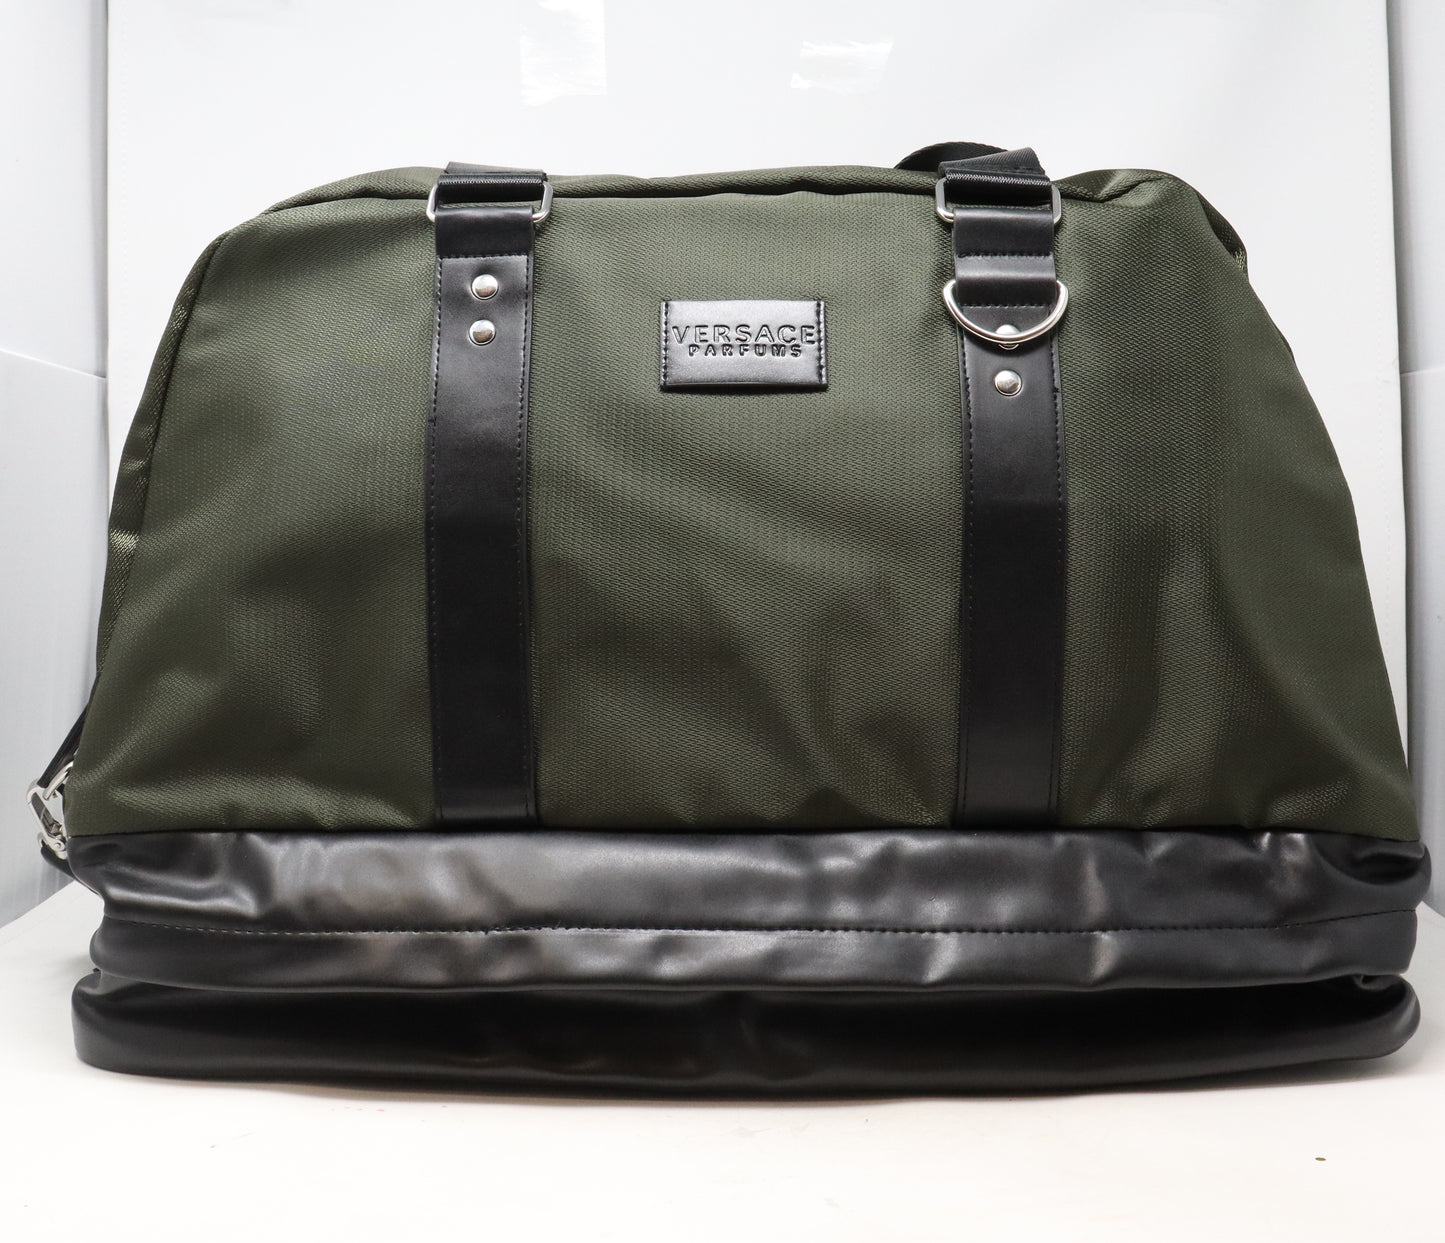 Parfums Limited Edition Military Green Men's Gym Bag